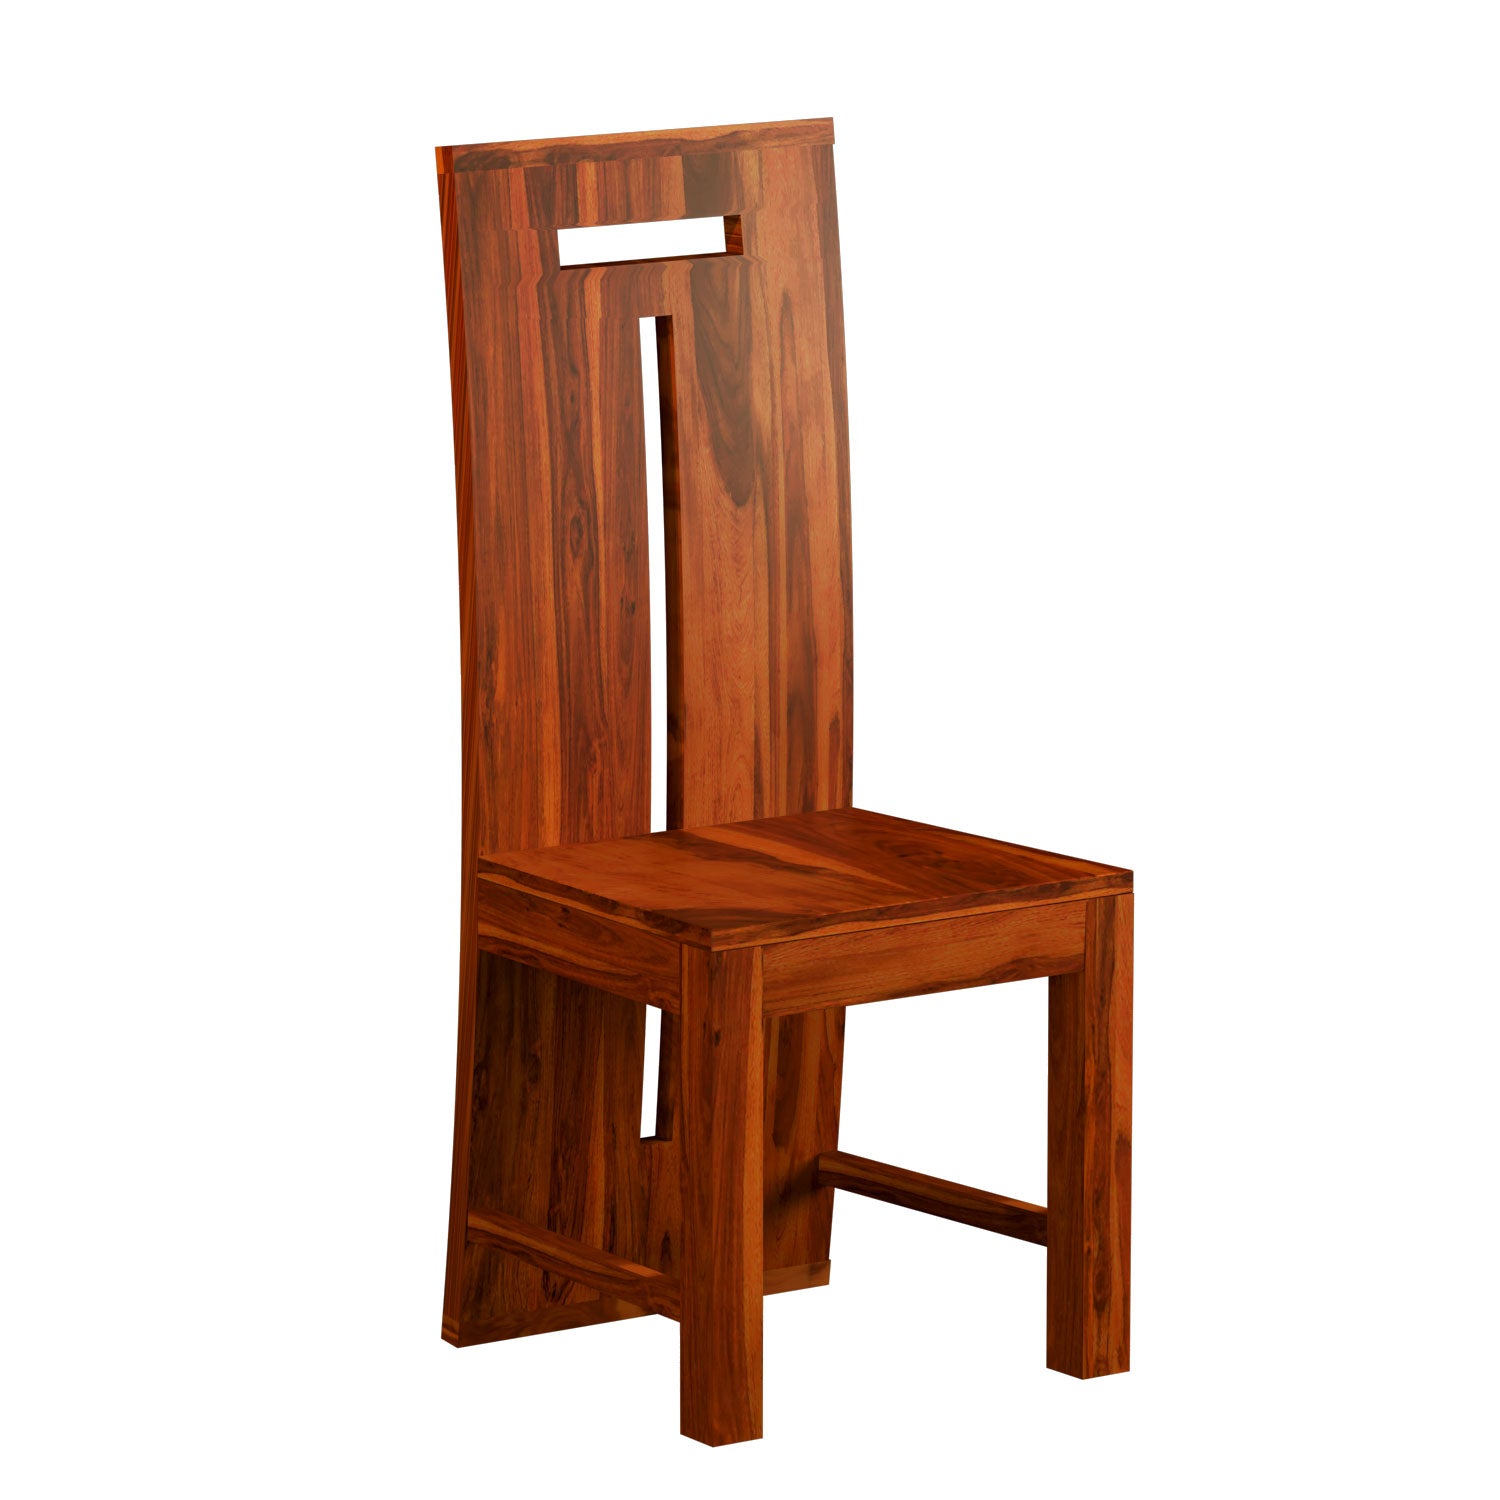 Maurice Solid Sheesham Wood High Back Chair (Natural Finish)